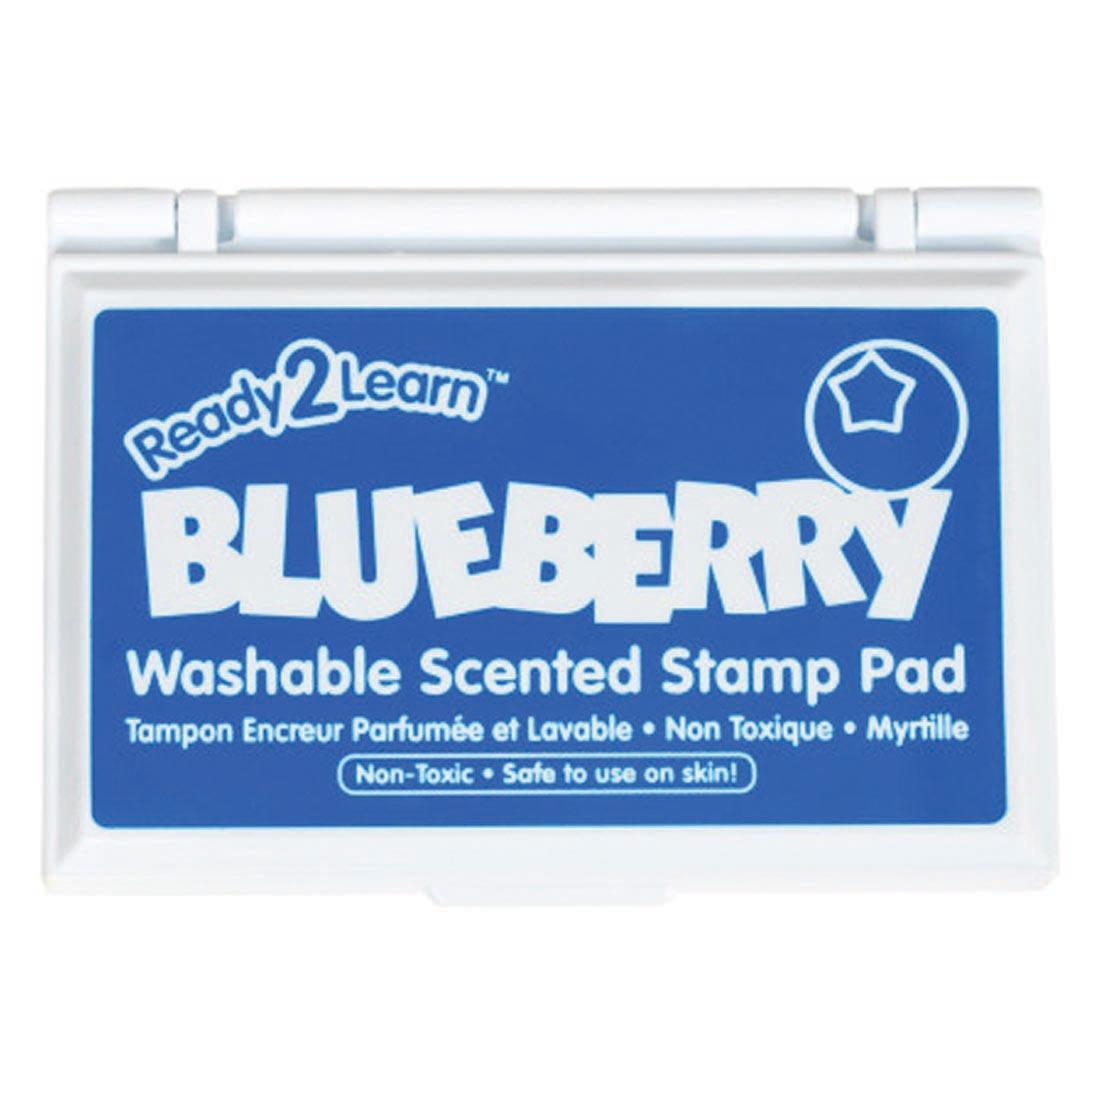 Ready 2 Learn Blueberry Scented Washable Stamp Pad